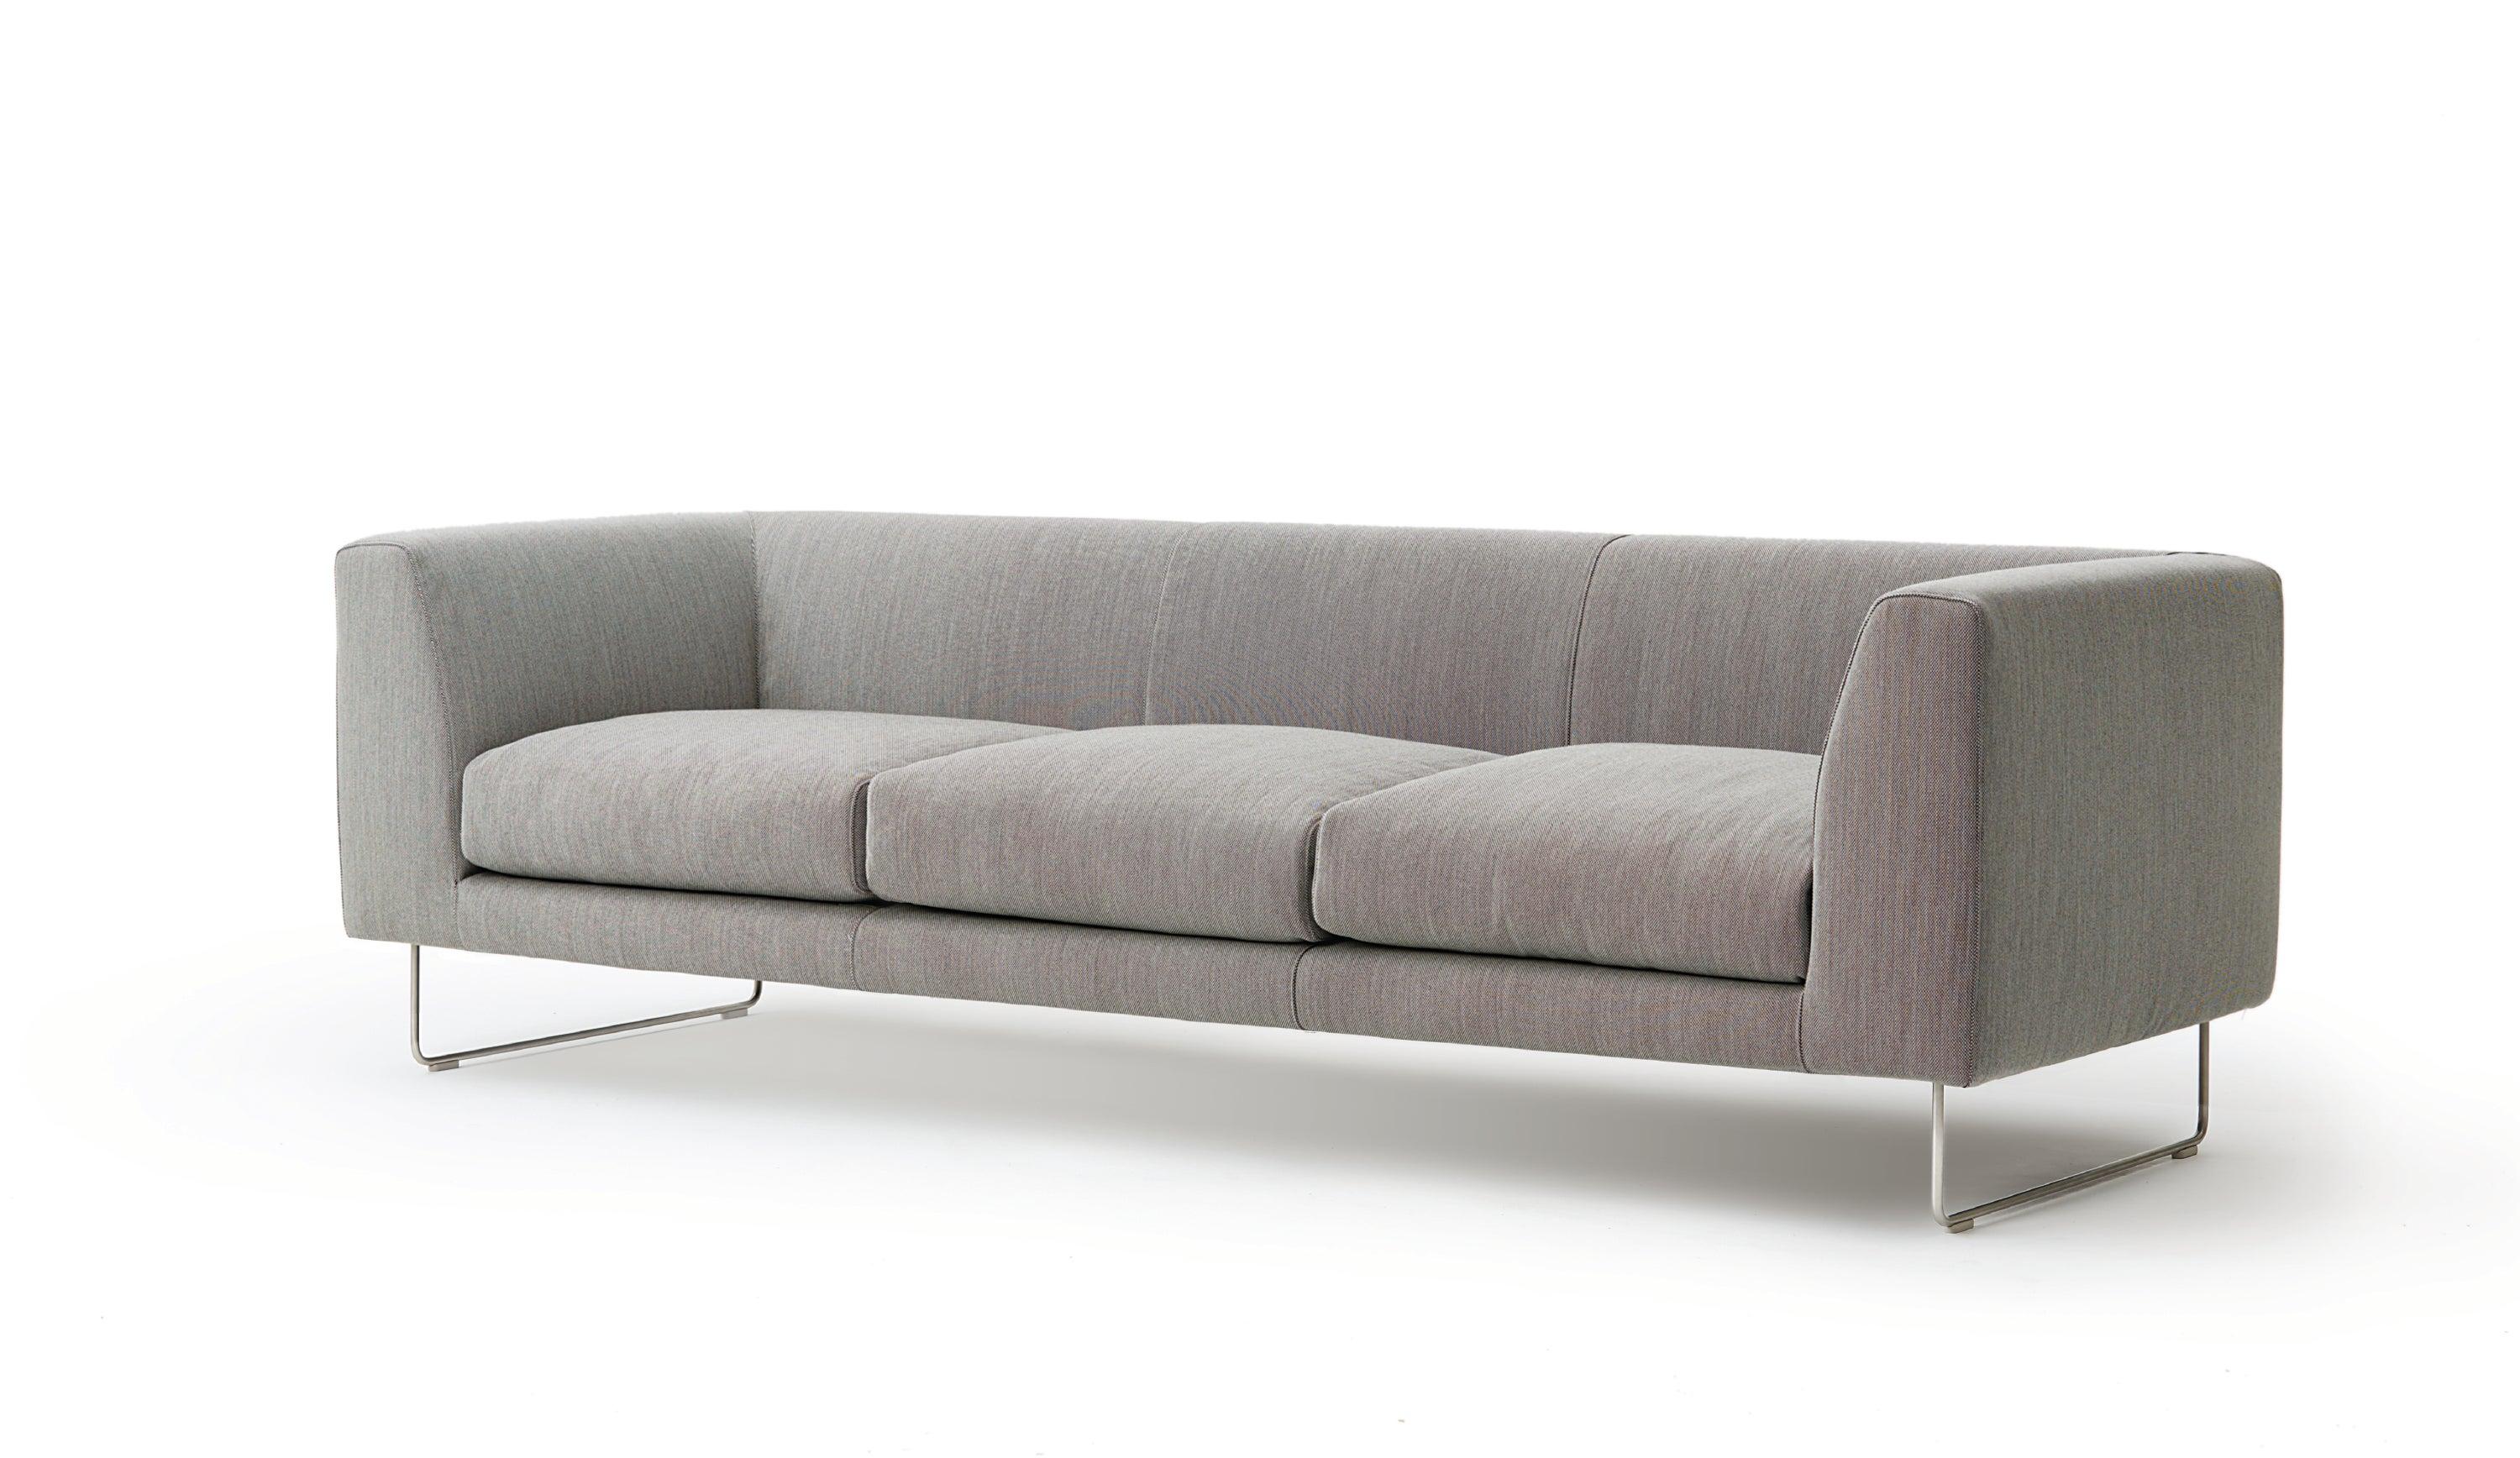 An unstoppable commercial success, the Elan sofa continues to impress. Designed by Jasper Morrison in 1999, Elan sofas rest upon medium-density conglomerate panels, solid fir wood, poplar plywood and metal inserts on top of springy elastic belts;